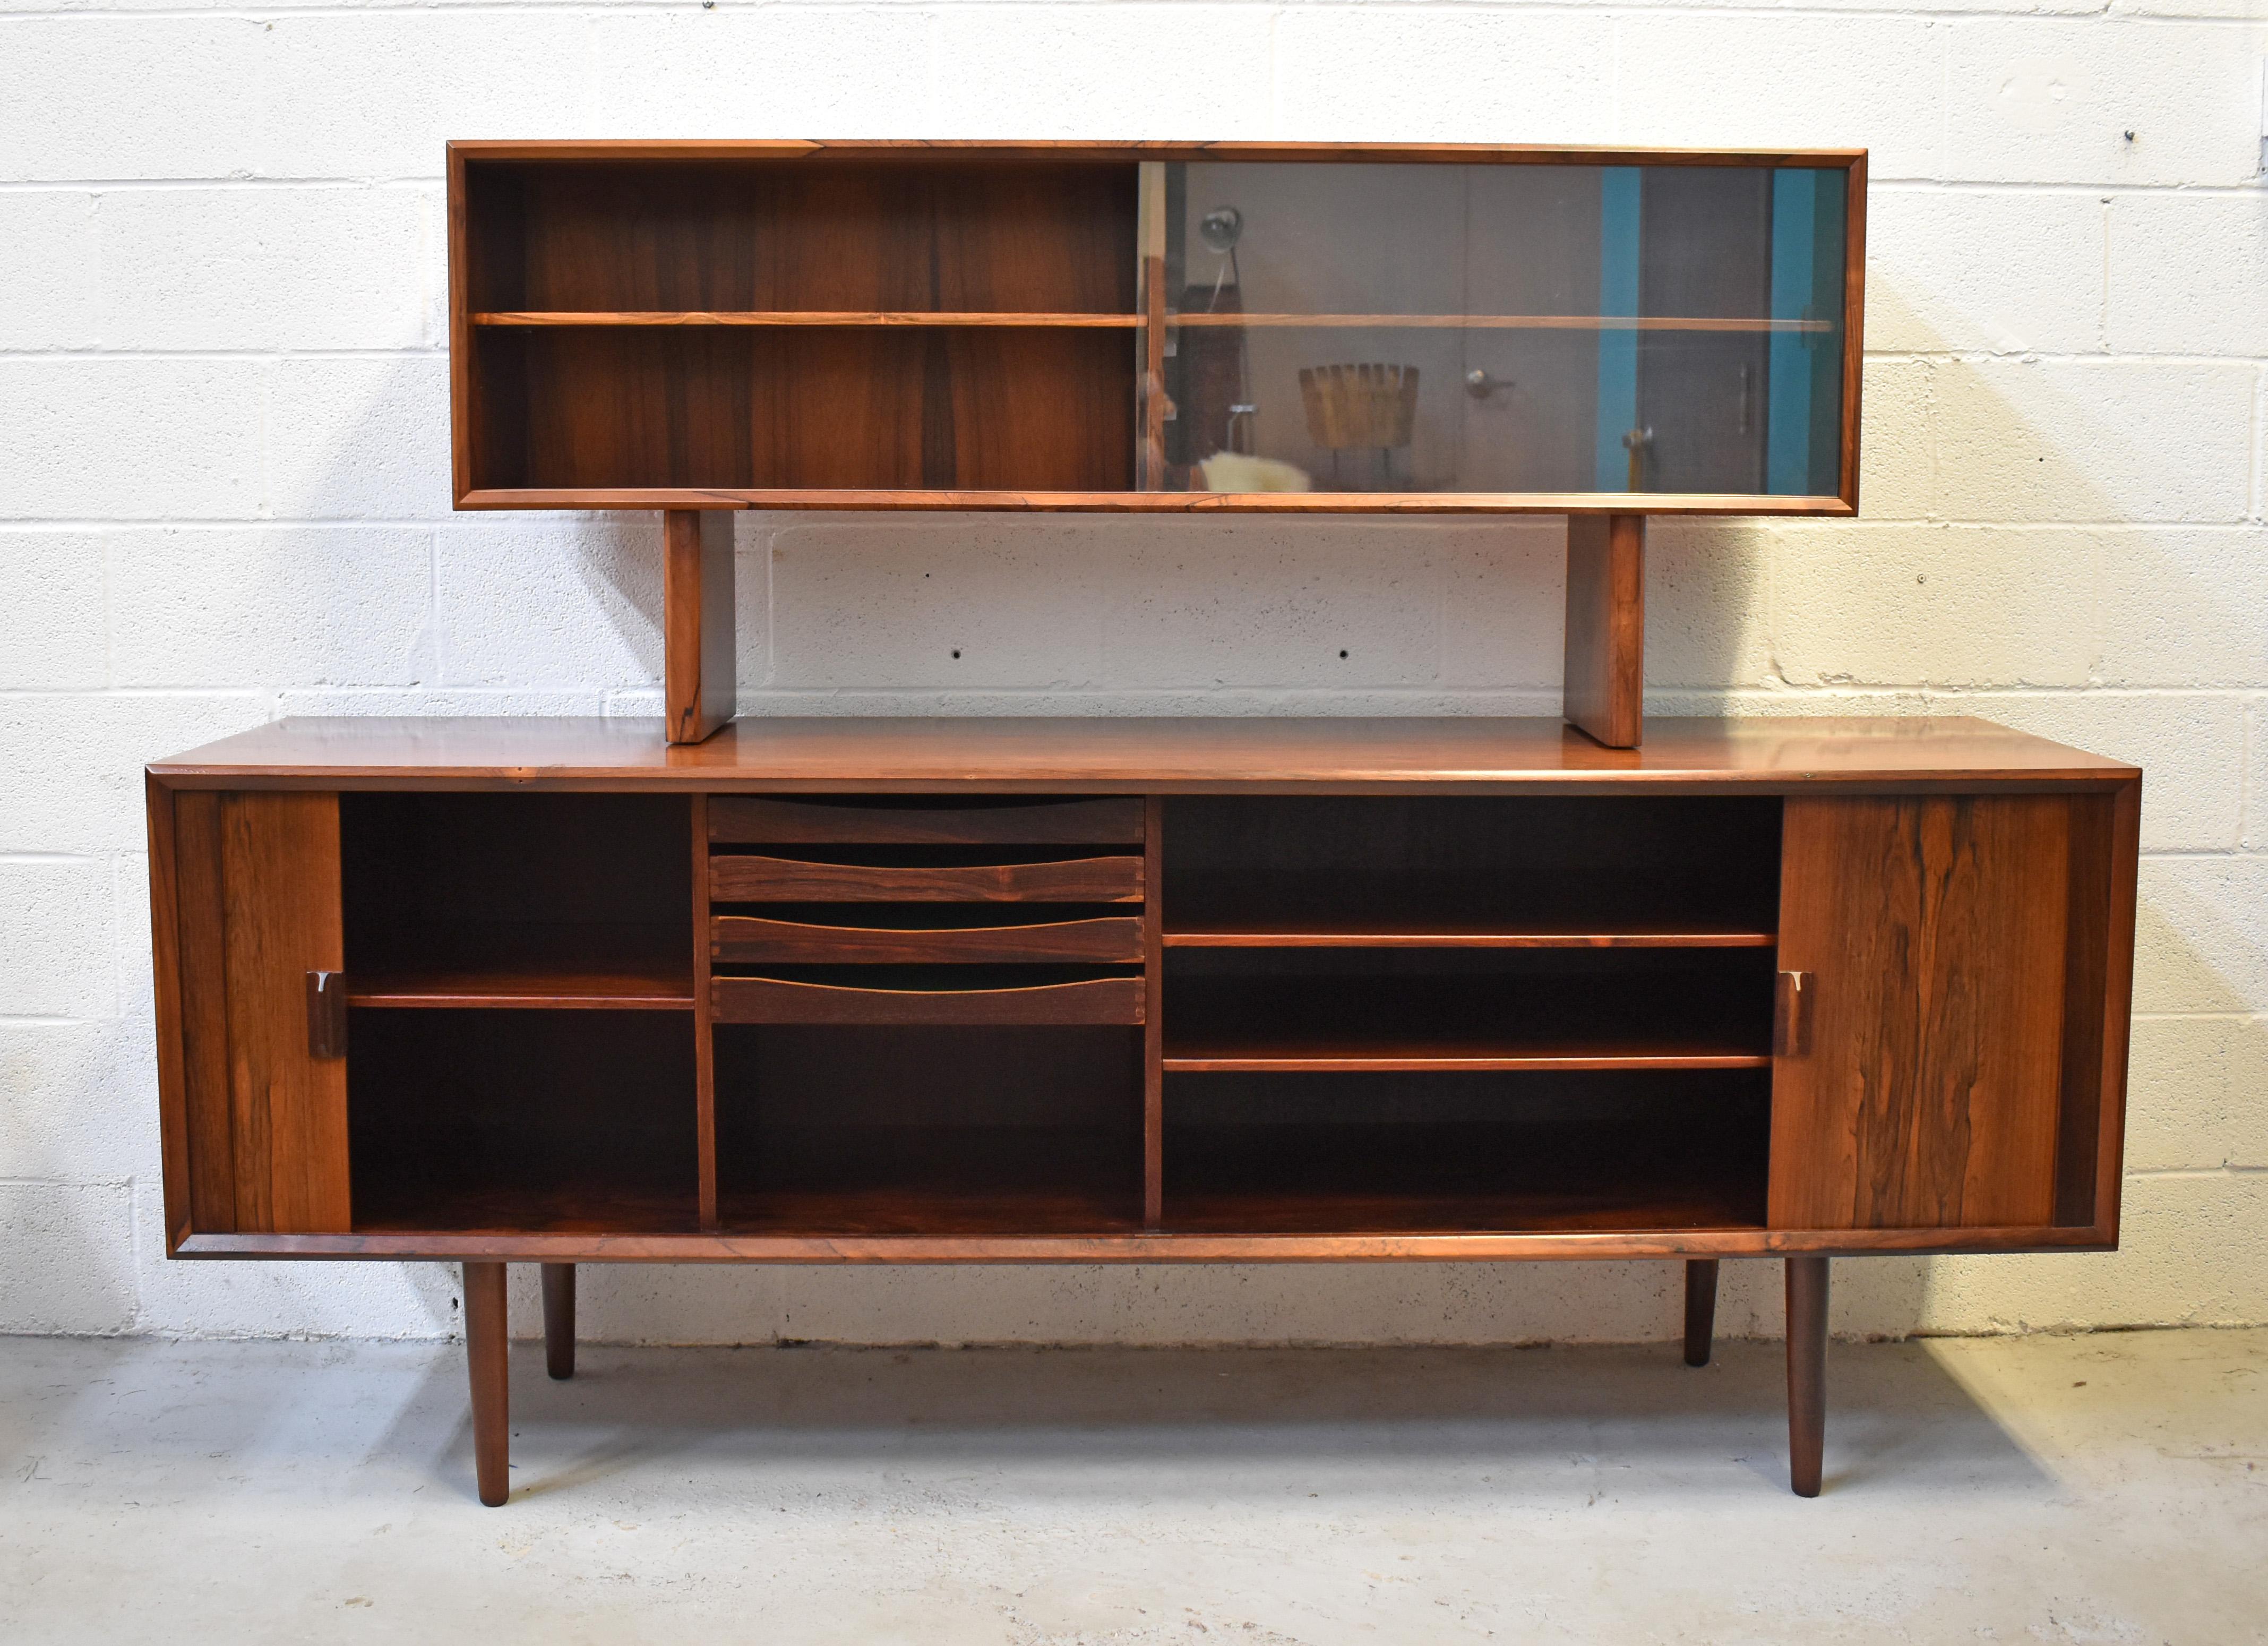 This stunning rosewood two-piece sideboard was designed by Svend Larsen for Faarup Møbelfabrik. The tamboured doors with book matched grain move smoothly and freely and open to reveal four green-felt lined drawers and shelving. The top unit is